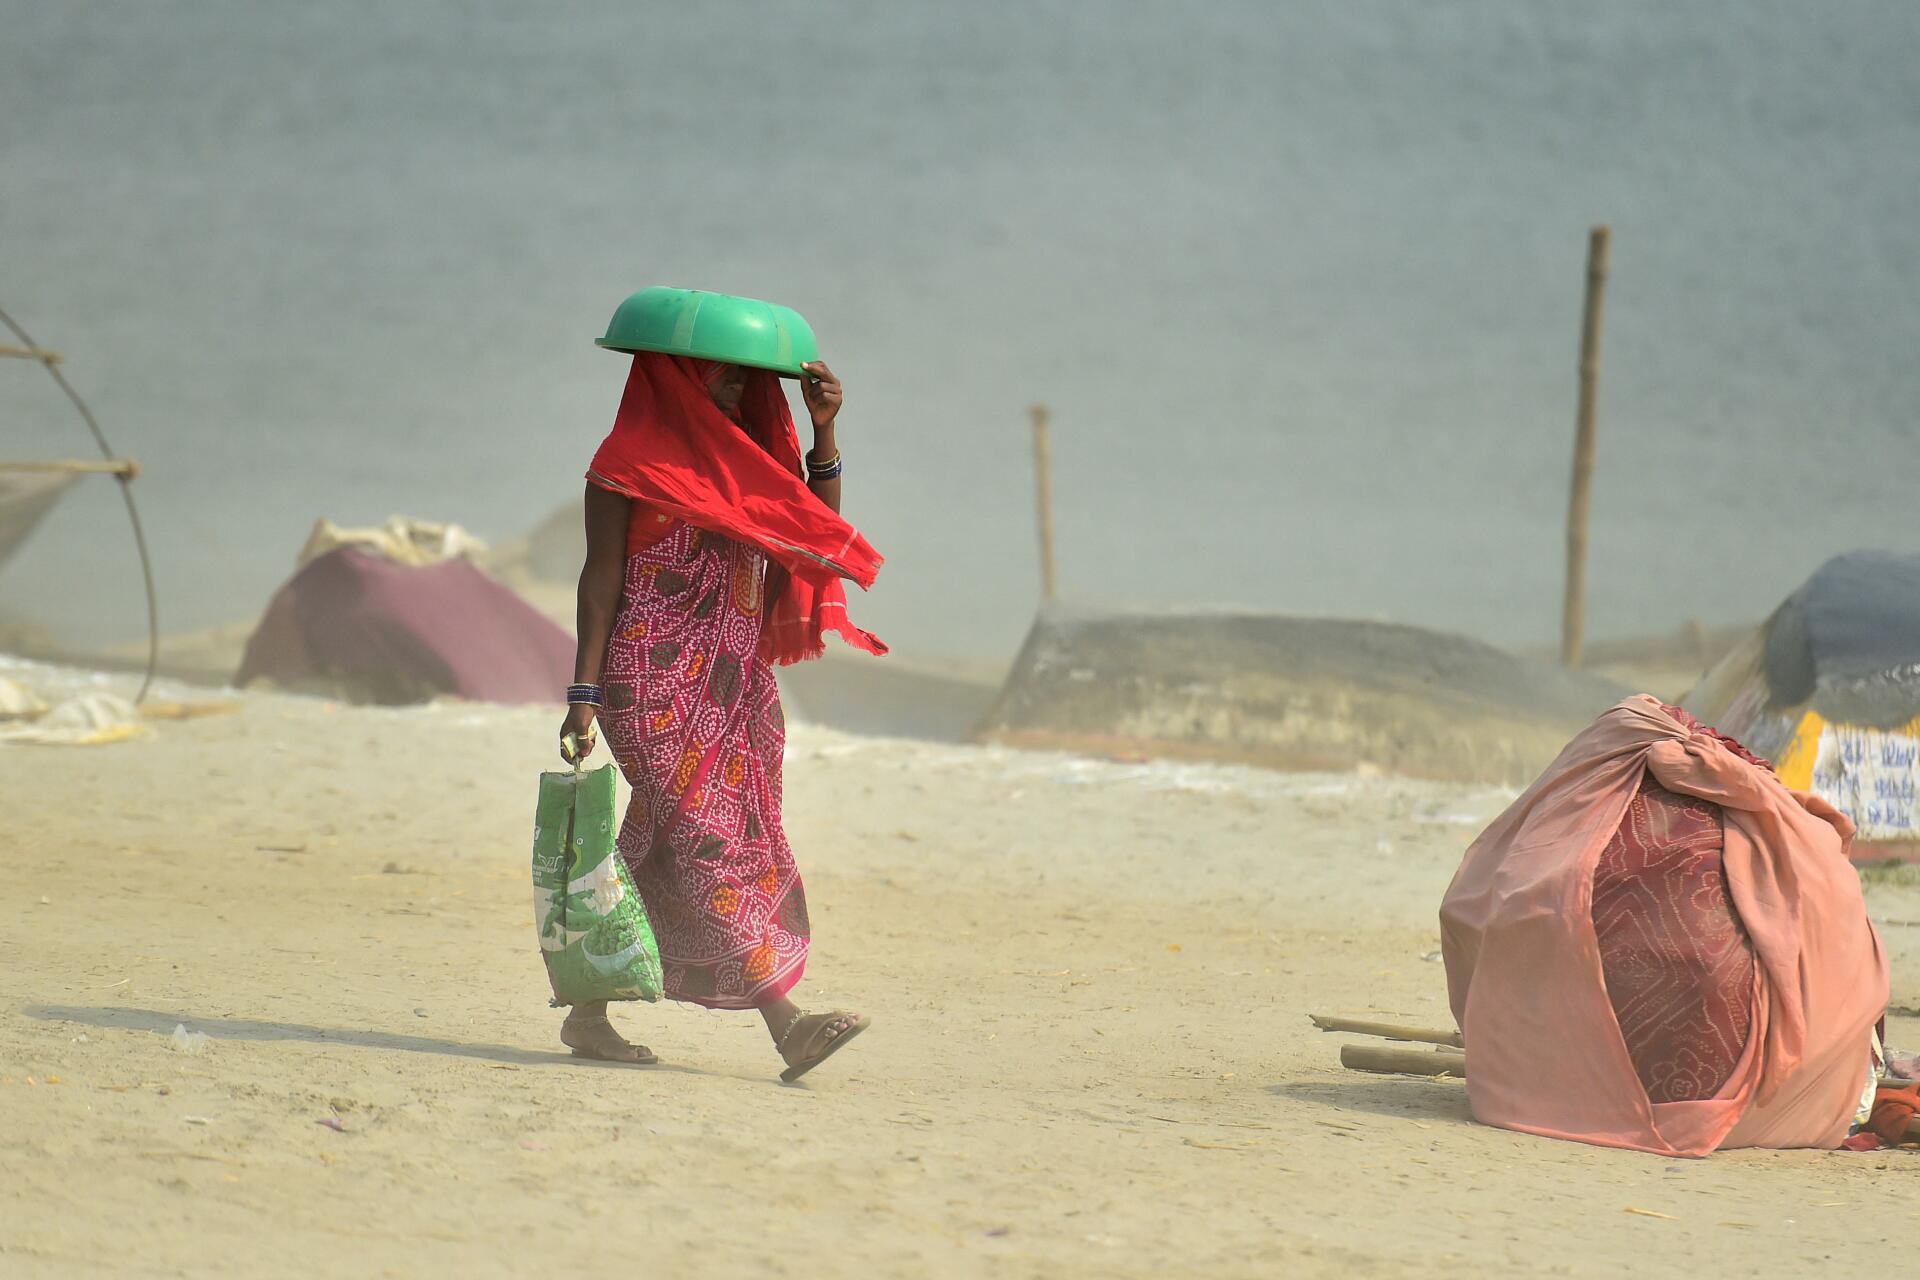 A woman covers her head with a plastic tub as she walks near Sangam, the confluence of the rivers Ganges, Yamuna and the legendary Saraswati River, in the city of Allahabad on April 30, 2022.